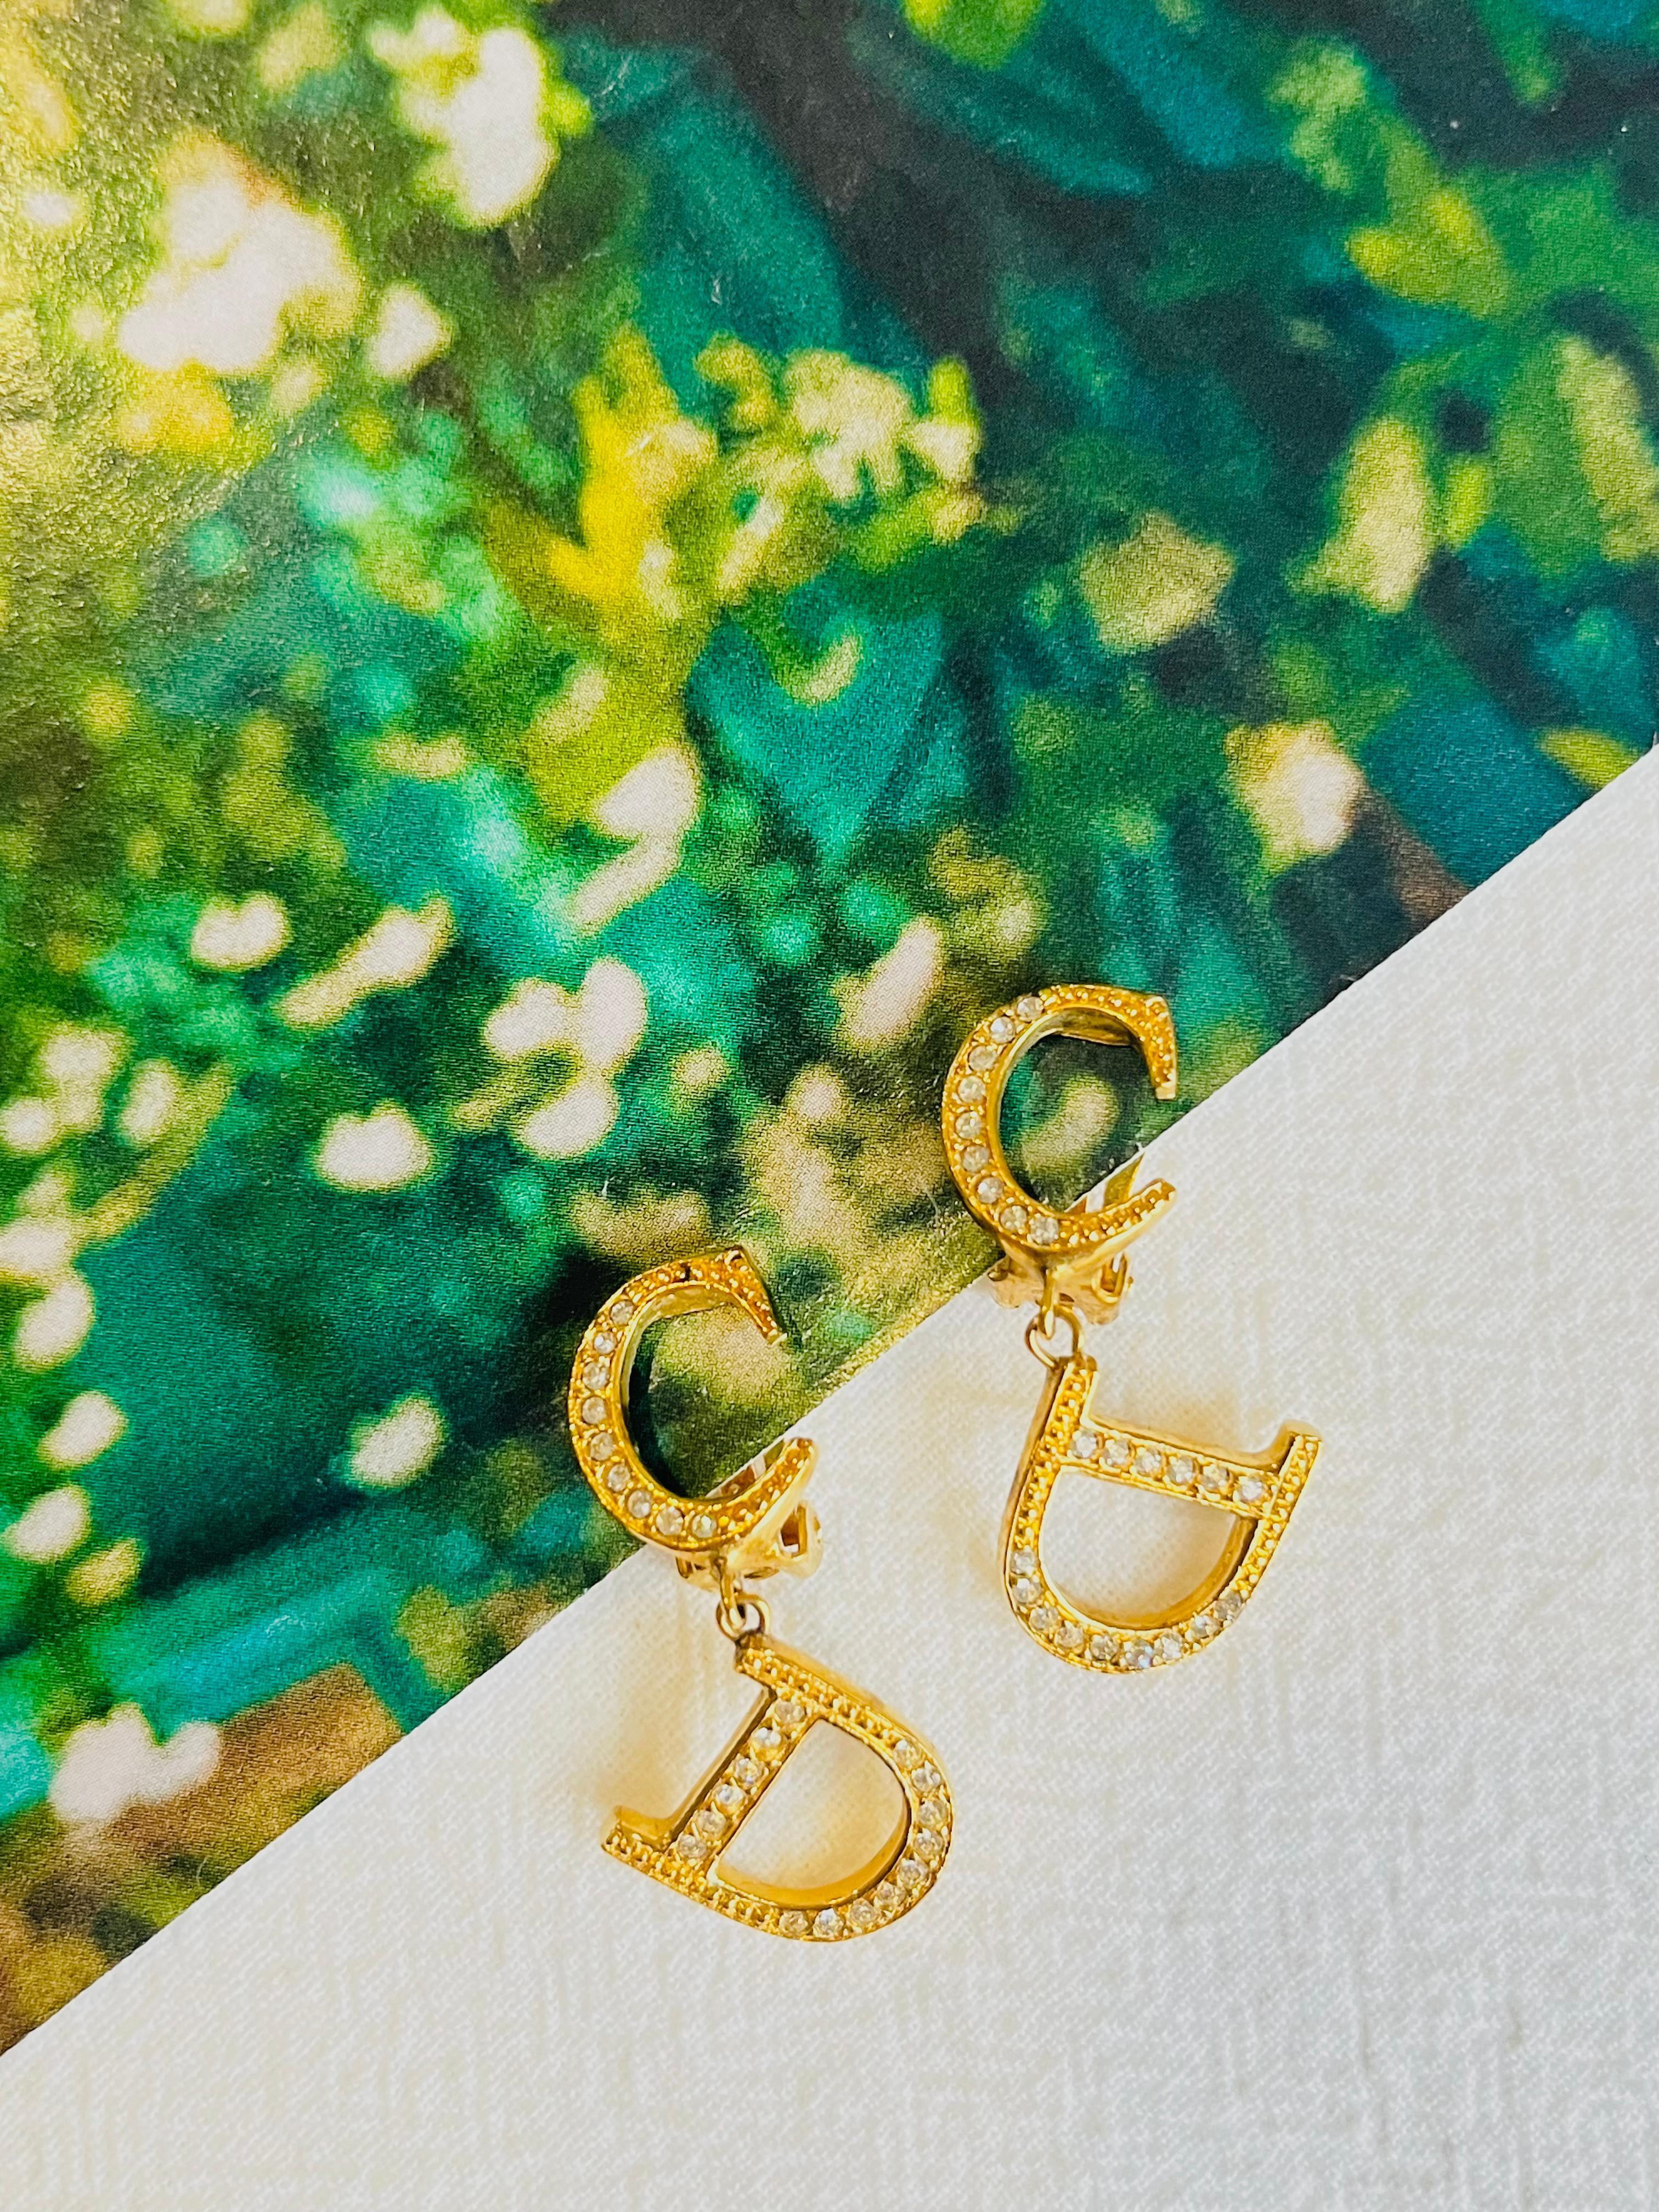 Very excellent condition. Maybe some light scratches or colour loss, barely noticeable. 100% Genuine.

A very beautiful pair of earrings by DIOR, signed at the back. Rare to find.

Size: 3.5*1.6 cm.

Weight: 2.5 g/each.

_ _ _

Great for everyday